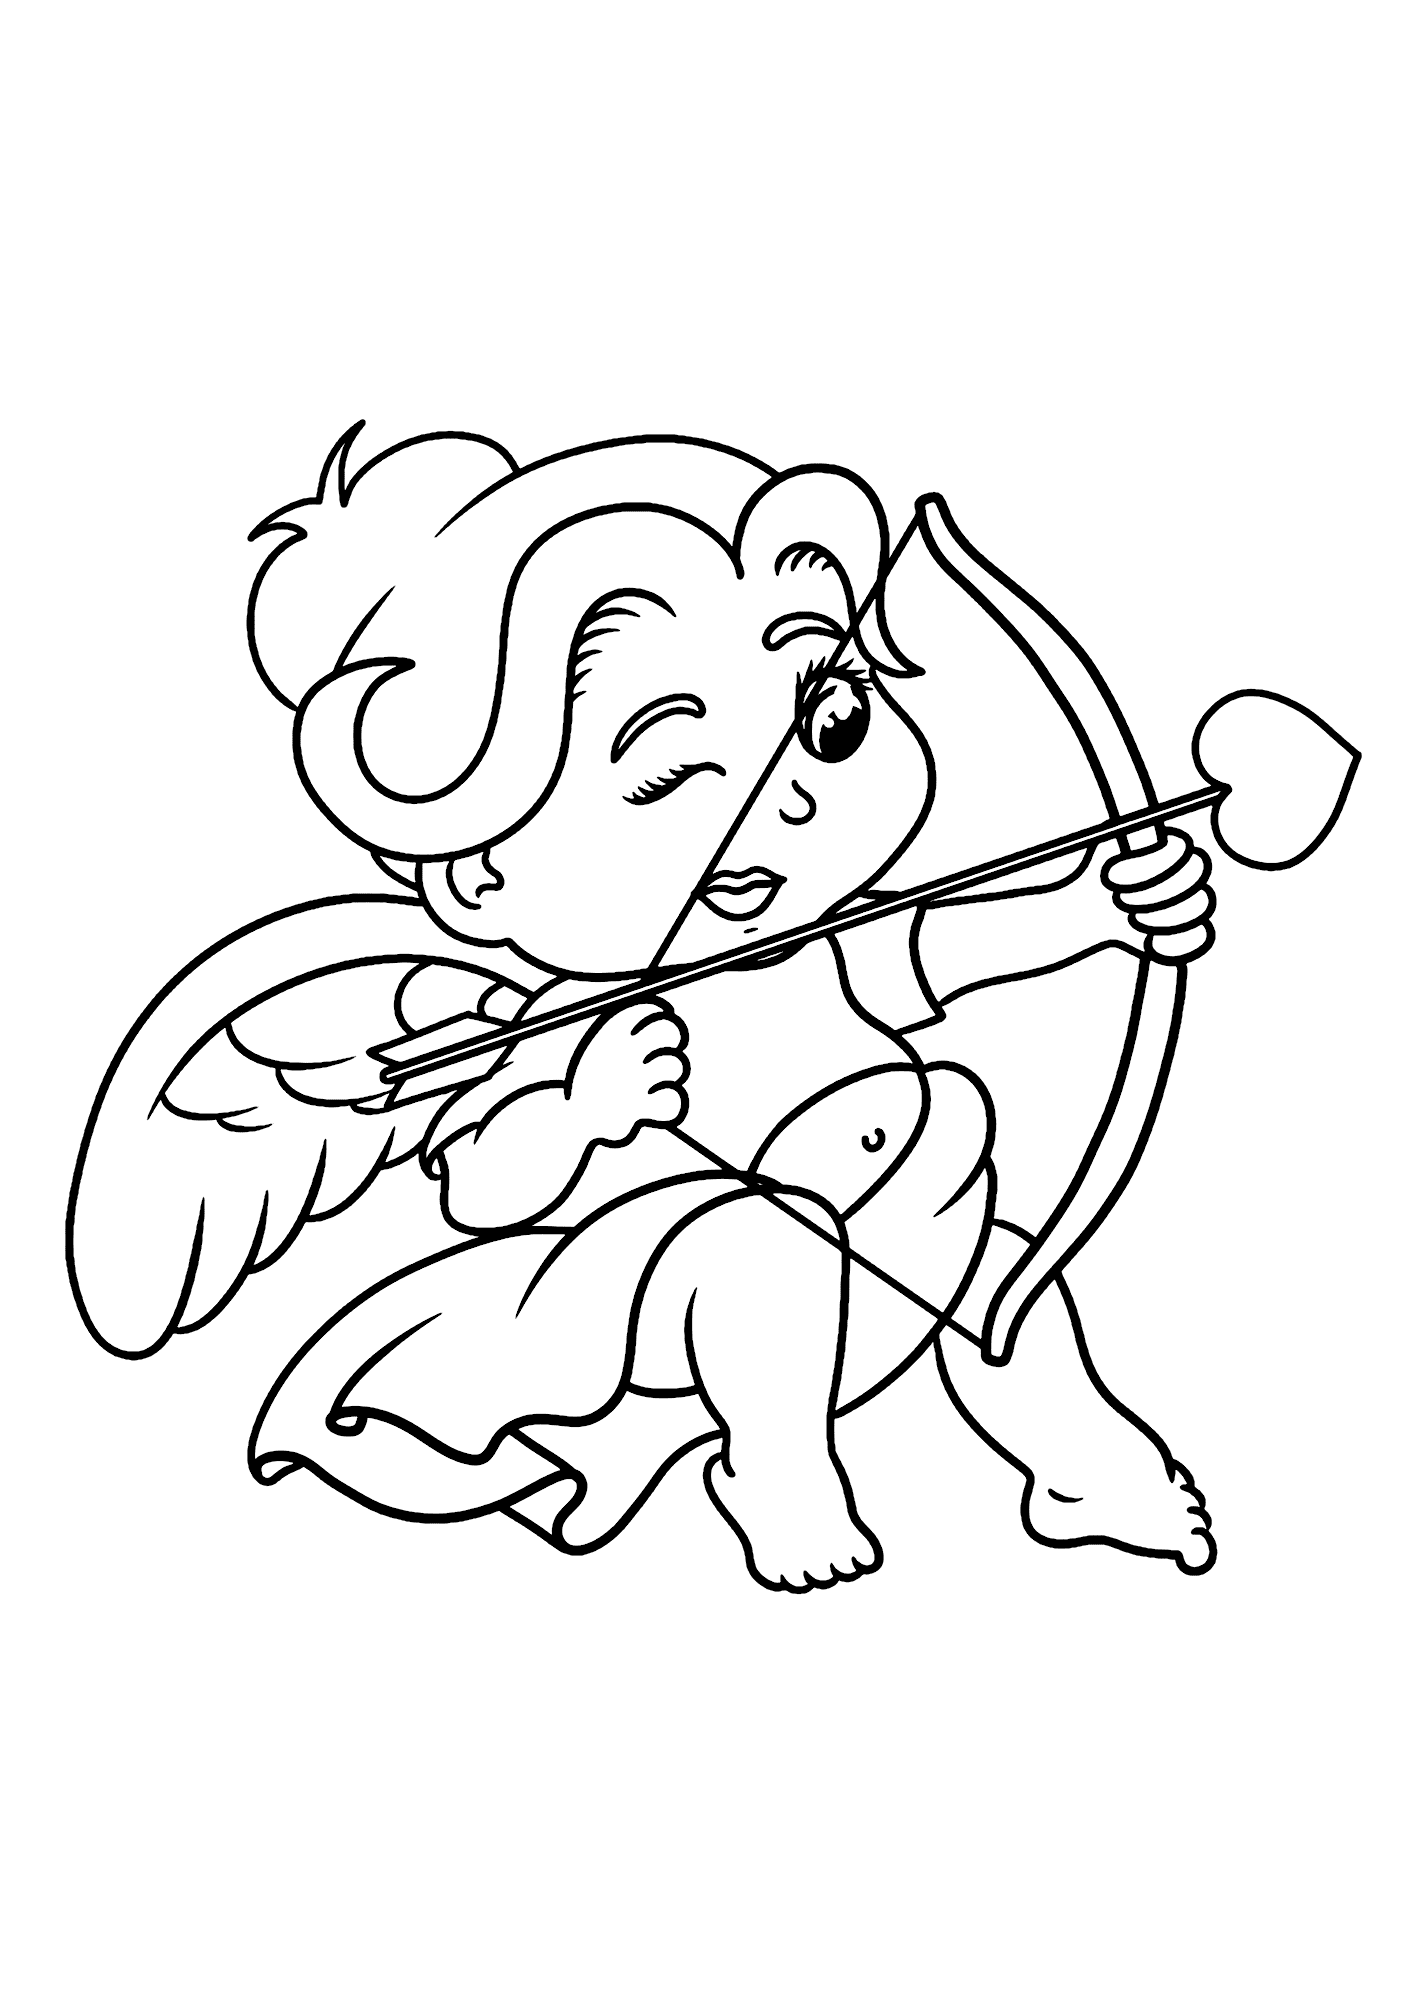 Cupid Valentine's Day Image Coloring Pages